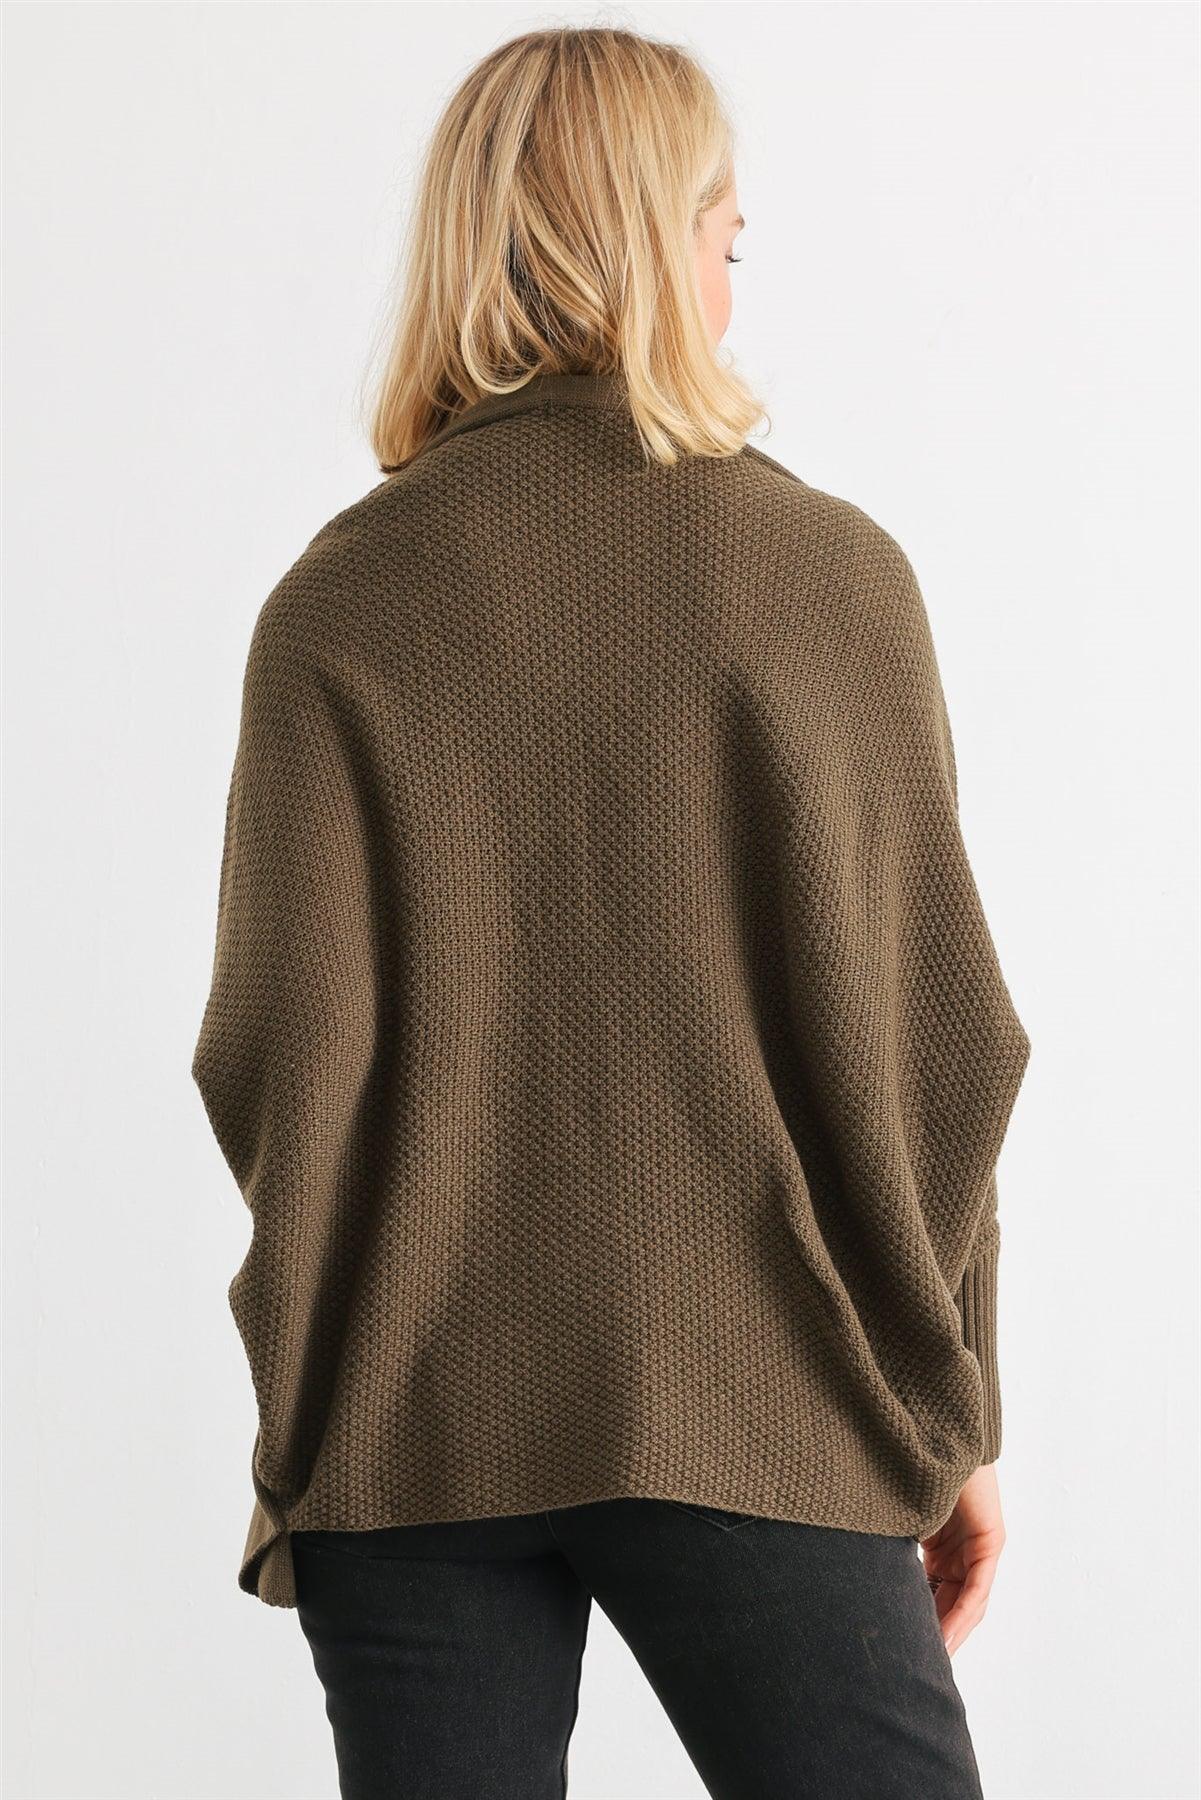 Olive Knit Batwing Sleeve Open Front Cardigan /2-2-2